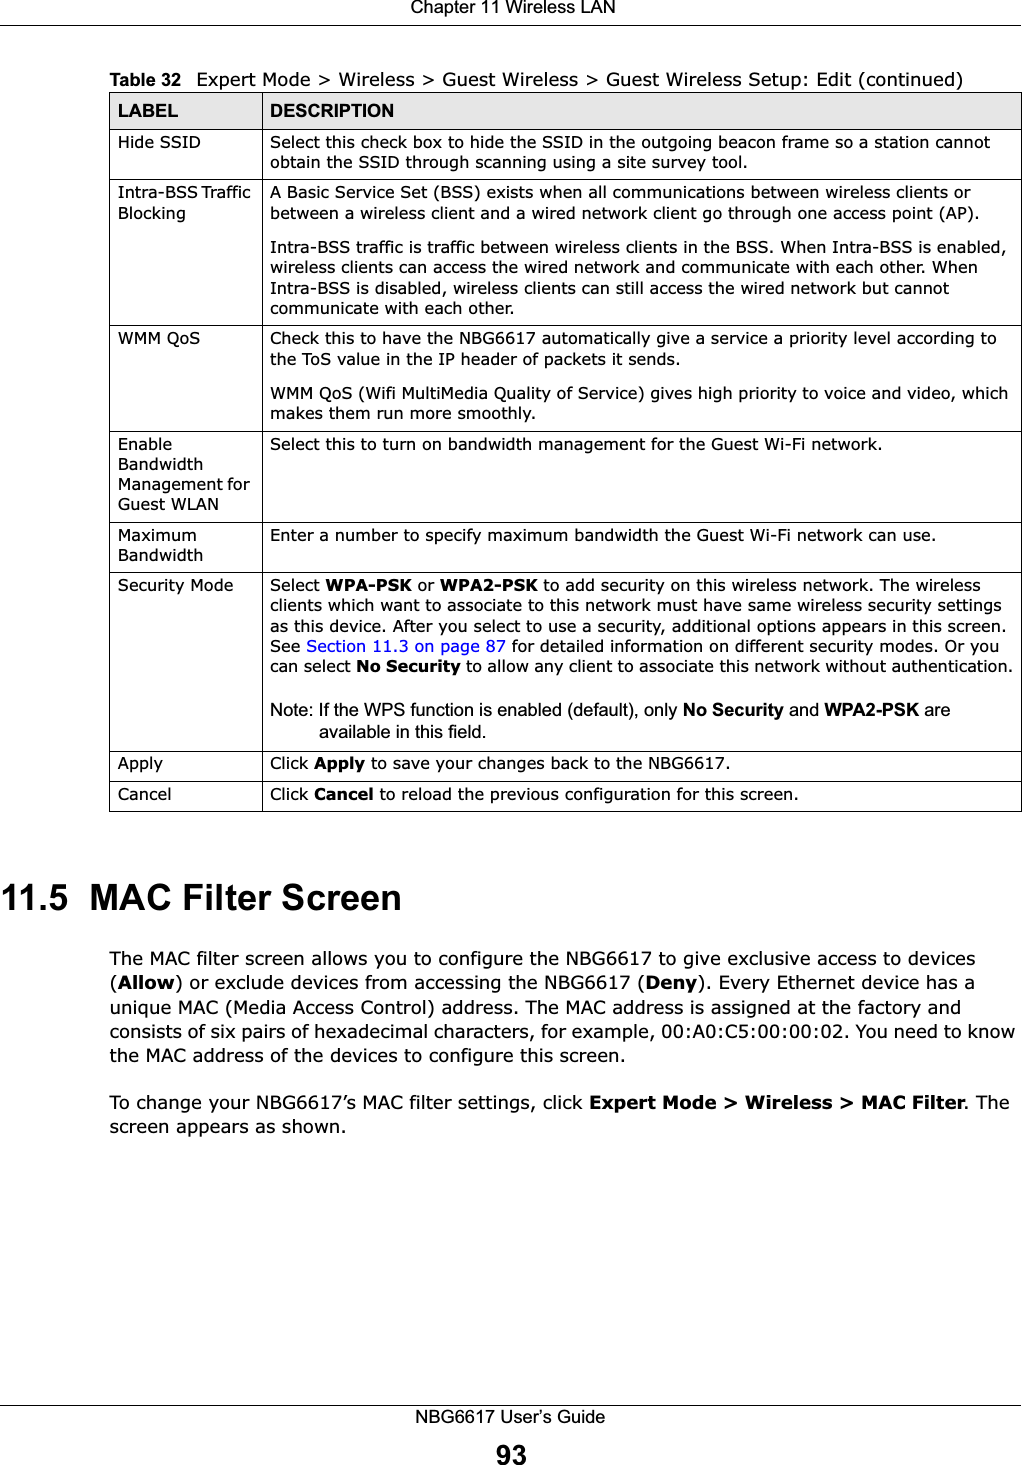  Chapter 11 Wireless LANNBG6617 User’s Guide9311.5  MAC Filter Screen The MAC filter screen allows you to configure the NBG6617 to give exclusive access to devices (Allow) or exclude devices from accessing the NBG6617 (Deny). Every Ethernet device has a unique MAC (Media Access Control) address. The MAC address is assigned at the factory and consists of six pairs of hexadecimal characters, for example, 00:A0:C5:00:00:02. You need to know the MAC address of the devices to configure this screen.To change your NBG6617’s MAC filter settings, click Expert Mode &gt; Wireless &gt; MAC Filter. The screen appears as shown.Hide SSID Select this check box to hide the SSID in the outgoing beacon frame so a station cannot obtain the SSID through scanning using a site survey tool.Intra-BSS Traffic BlockingA Basic Service Set (BSS) exists when all communications between wireless clients or between a wireless client and a wired network client go through one access point (AP). Intra-BSS traffic is traffic between wireless clients in the BSS. When Intra-BSS is enabled, wireless clients can access the wired network and communicate with each other. When Intra-BSS is disabled, wireless clients can still access the wired network but cannot communicate with each other.WMM QoS Check this to have the NBG6617 automatically give a service a priority level according to the ToS value in the IP header of packets it sends. WMM QoS (Wifi MultiMedia Quality of Service) gives high priority to voice and video, which makes them run more smoothly.Enable Bandwidth Management for Guest WLAN Select this to turn on bandwidth management for the Guest Wi-Fi network.Maximum Bandwidth Enter a number to specify maximum bandwidth the Guest Wi-Fi network can use.Security Mode Select WPA-PSK or WPA2-PSK to add security on this wireless network. The wireless clients which want to associate to this network must have same wireless security settings as this device. After you select to use a security, additional options appears in this screen. See Section 11.3 on page 87 for detailed information on different security modes. Or you can select No Security to allow any client to associate this network without authentication.Note: If the WPS function is enabled (default), only No Security and WPA2-PSK are available in this field.Apply Click Apply to save your changes back to the NBG6617.Cancel Click Cancel to reload the previous configuration for this screen.Table 32   Expert Mode &gt; Wireless &gt; Guest Wireless &gt; Guest Wireless Setup: Edit (continued)LABEL DESCRIPTION